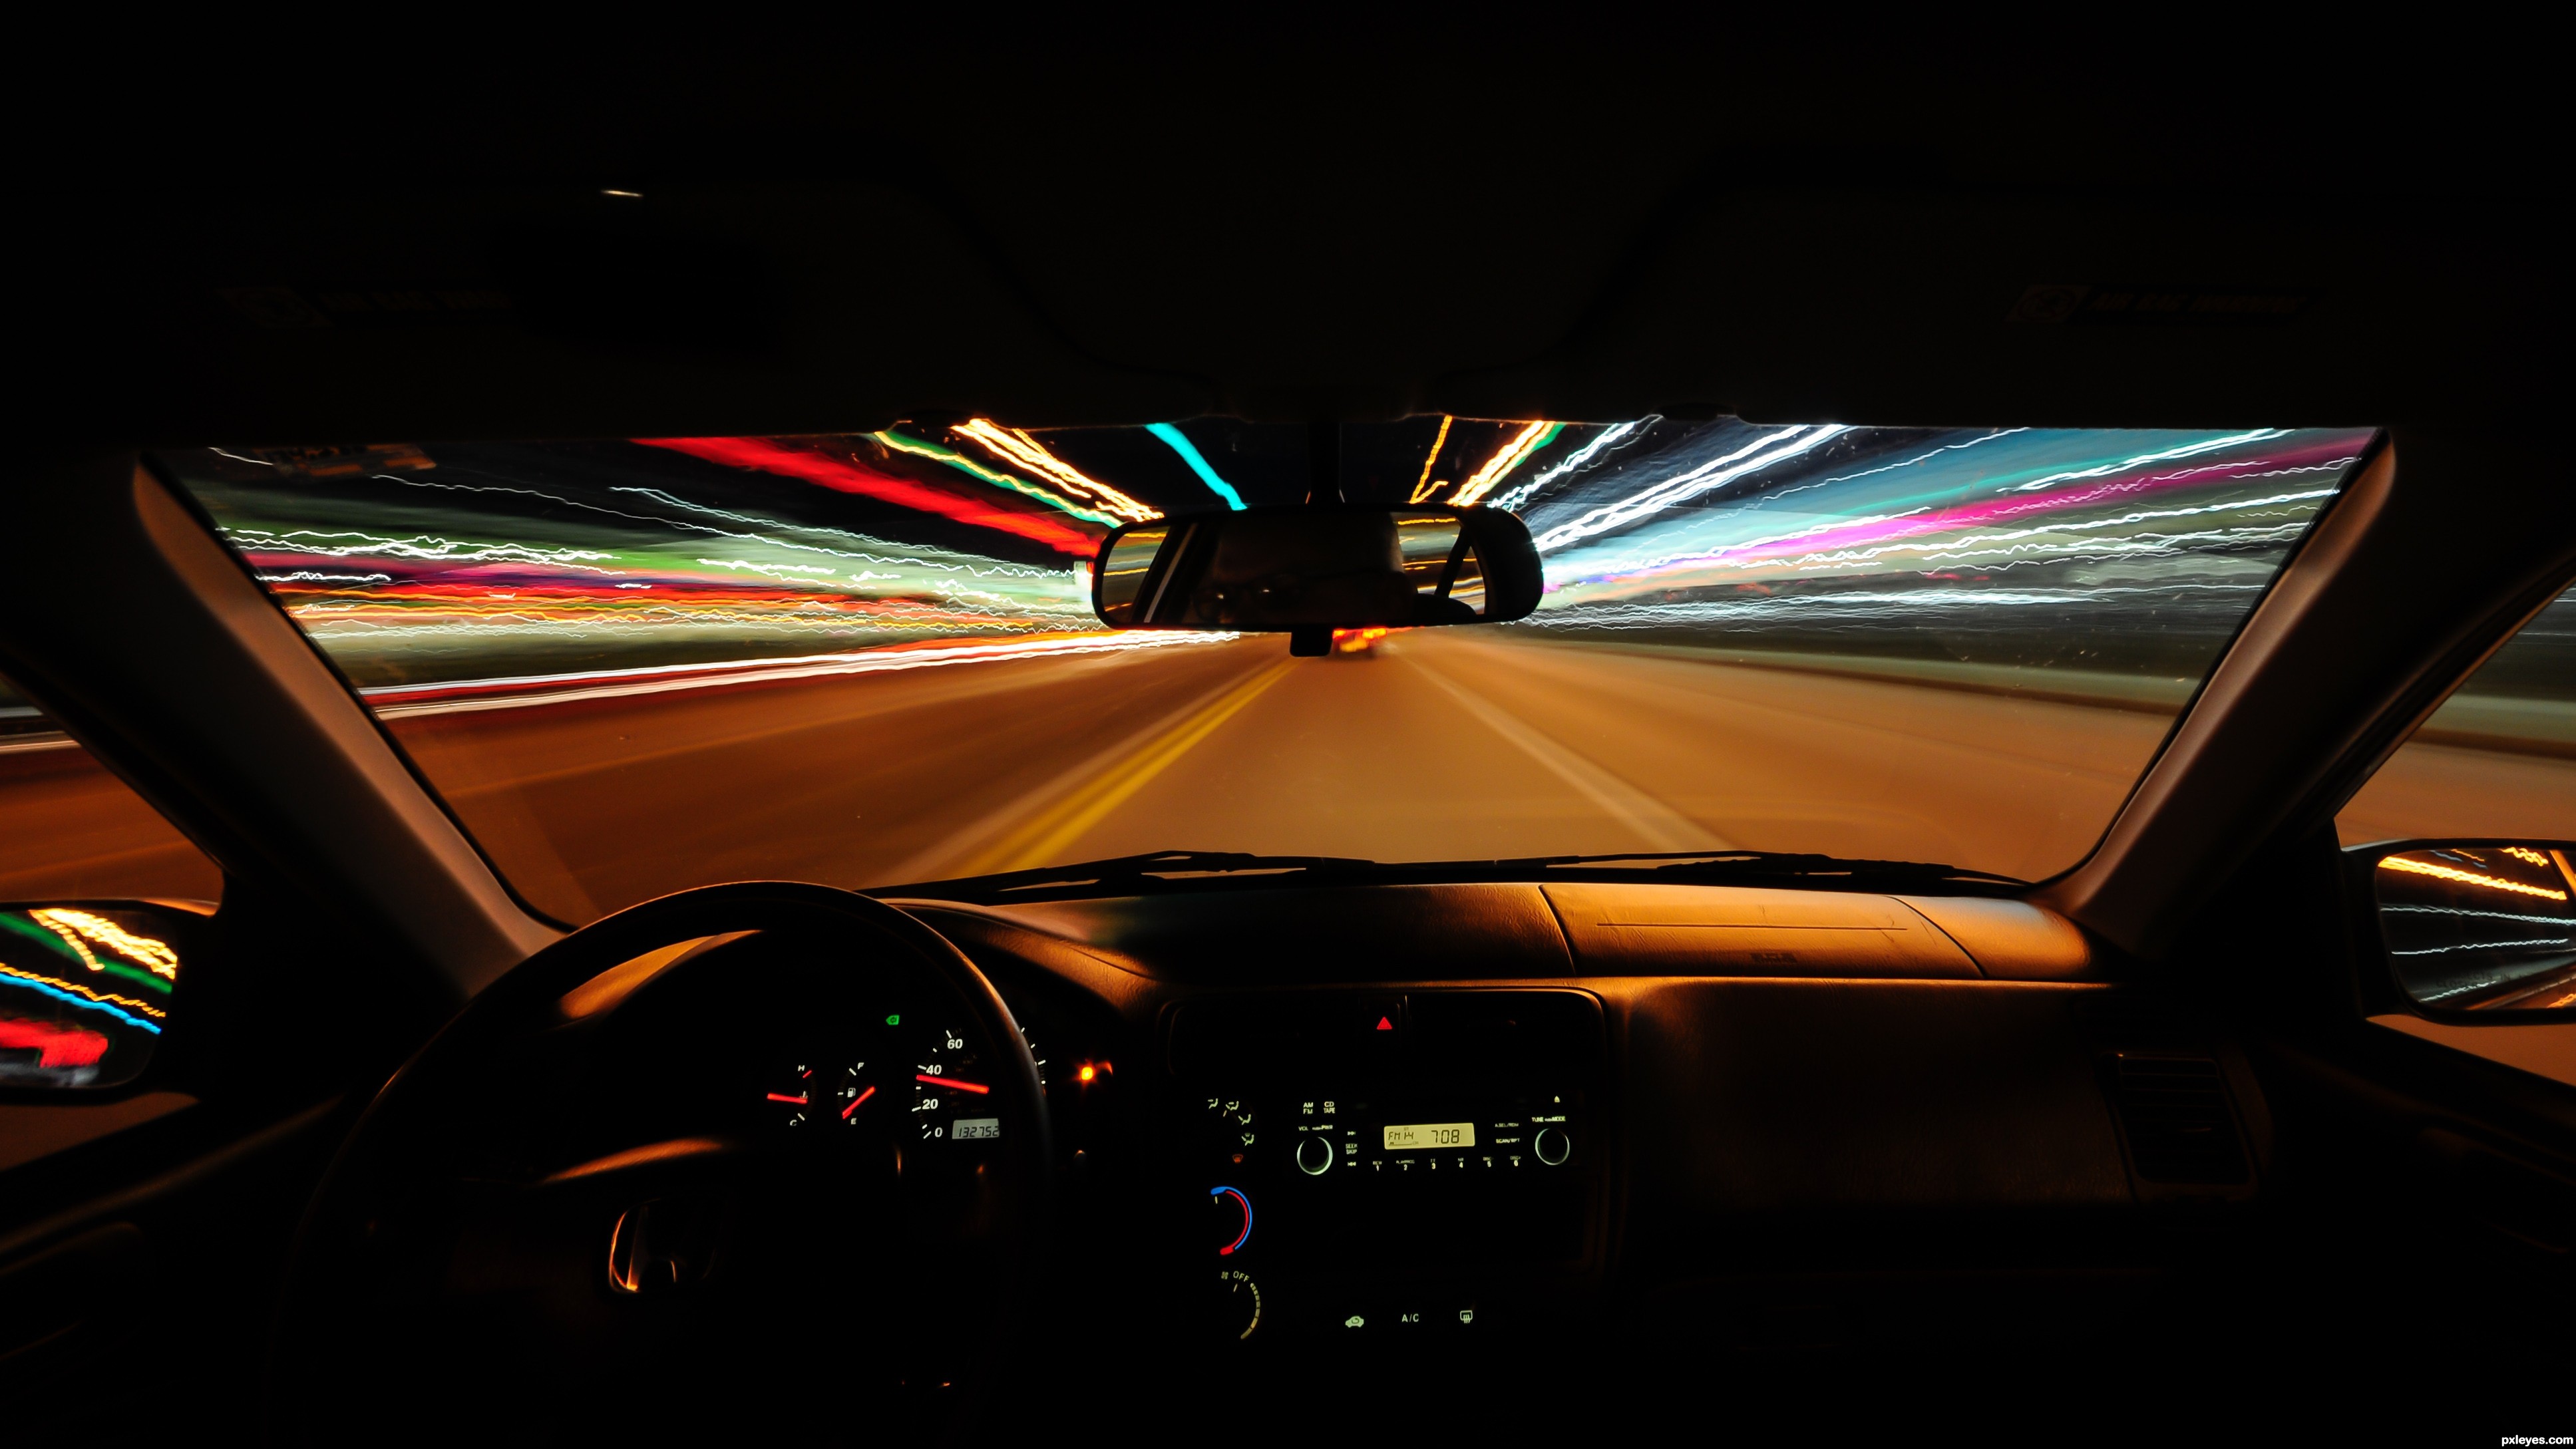 night drive picture, by bjschneider for: long exposure night ...